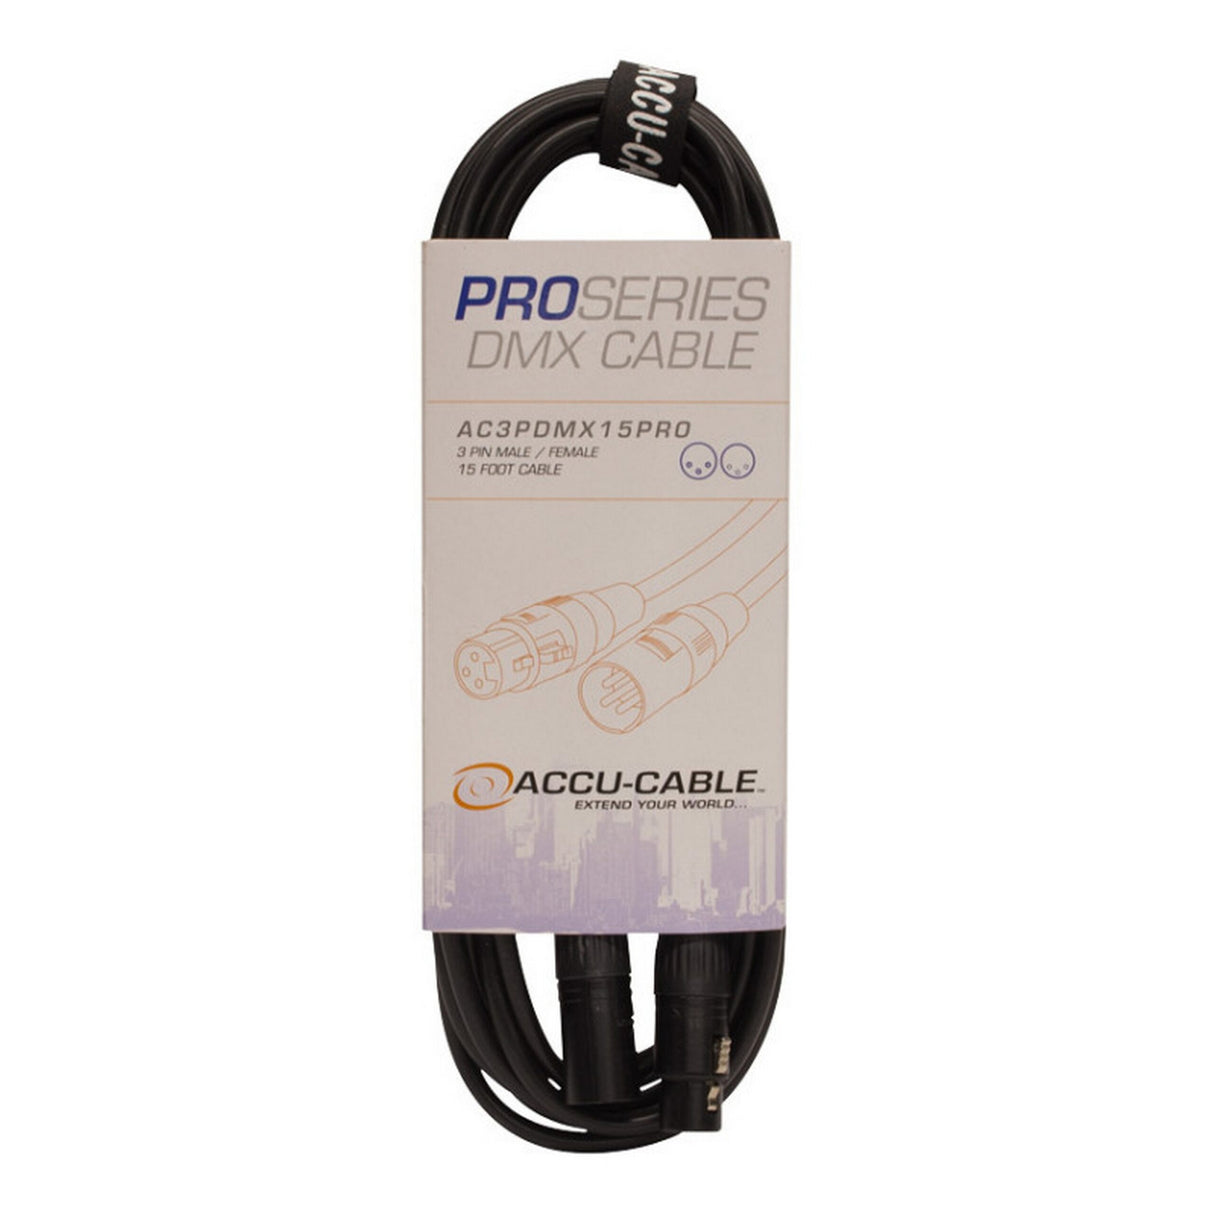 Accu Cable AC3PDMX15PRO Pro Series 15-Foot 3-Pin Male to 3-Pin Female DMX Cable